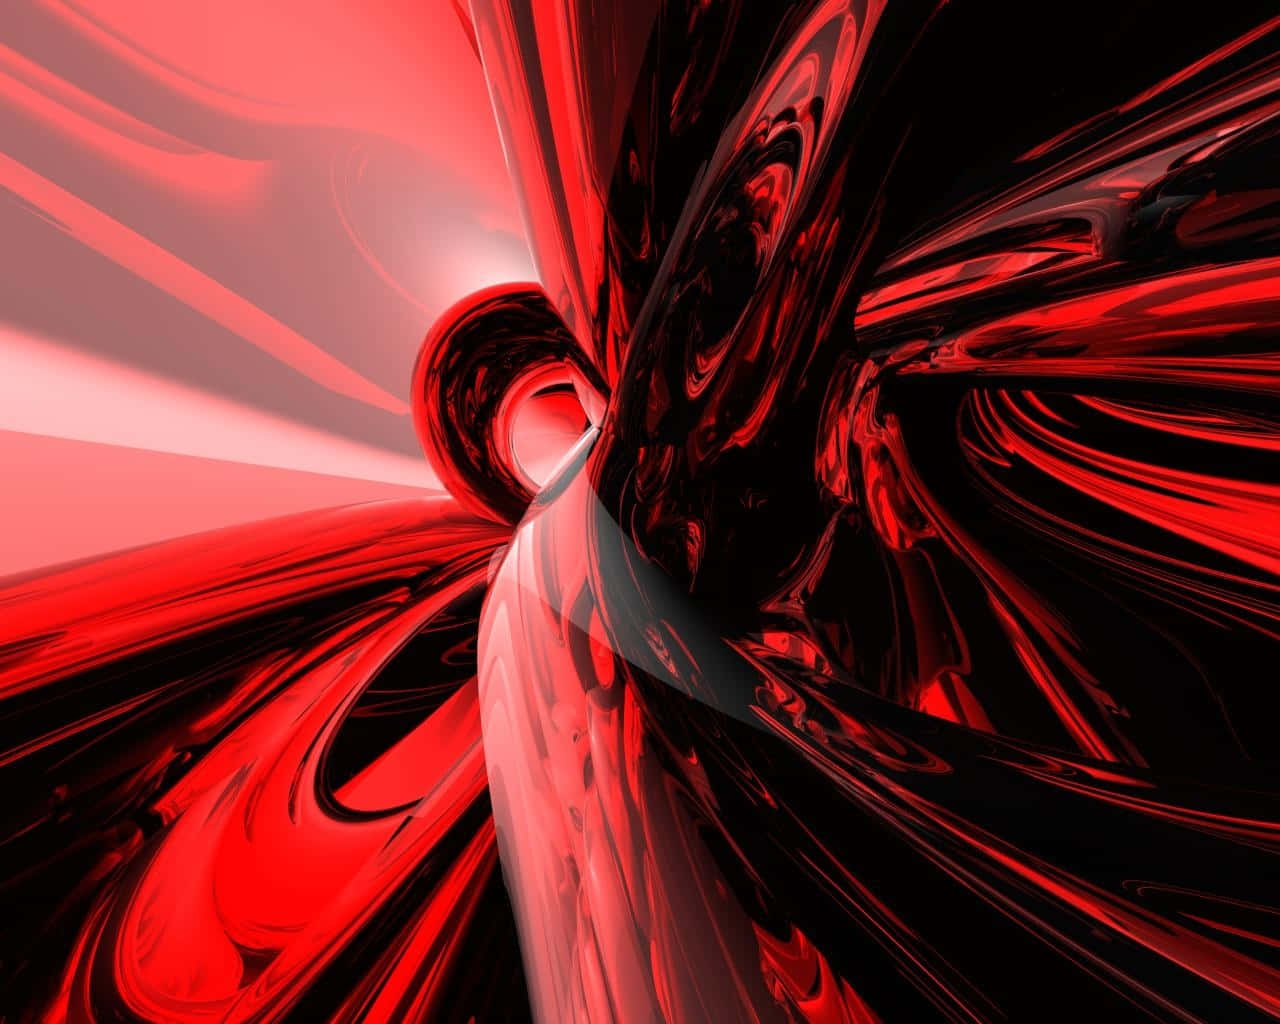 Dazzling Red and Black 1080p Background